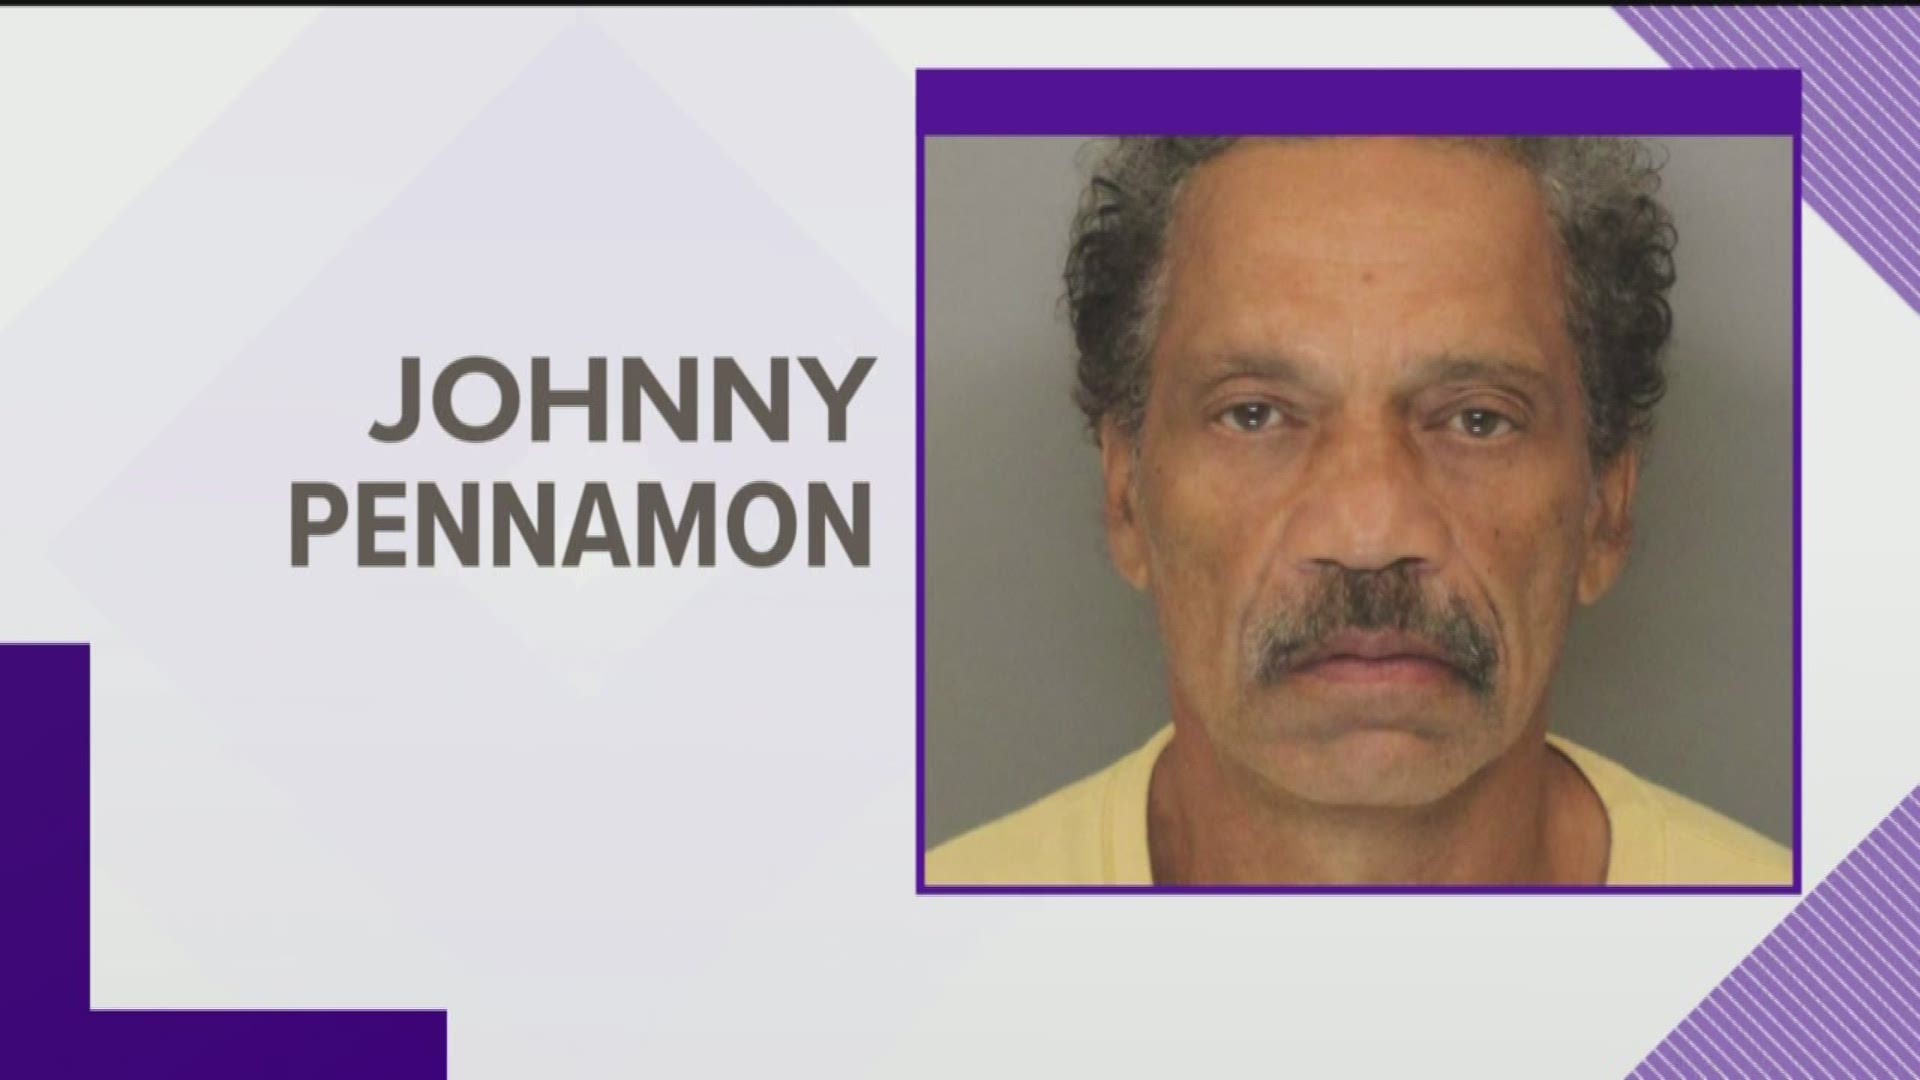 According to a news release, Johnny Pennamon was arrested in the fall of 2015 after he was found trying to enter the teenage victim's bedroom in the middle of the night